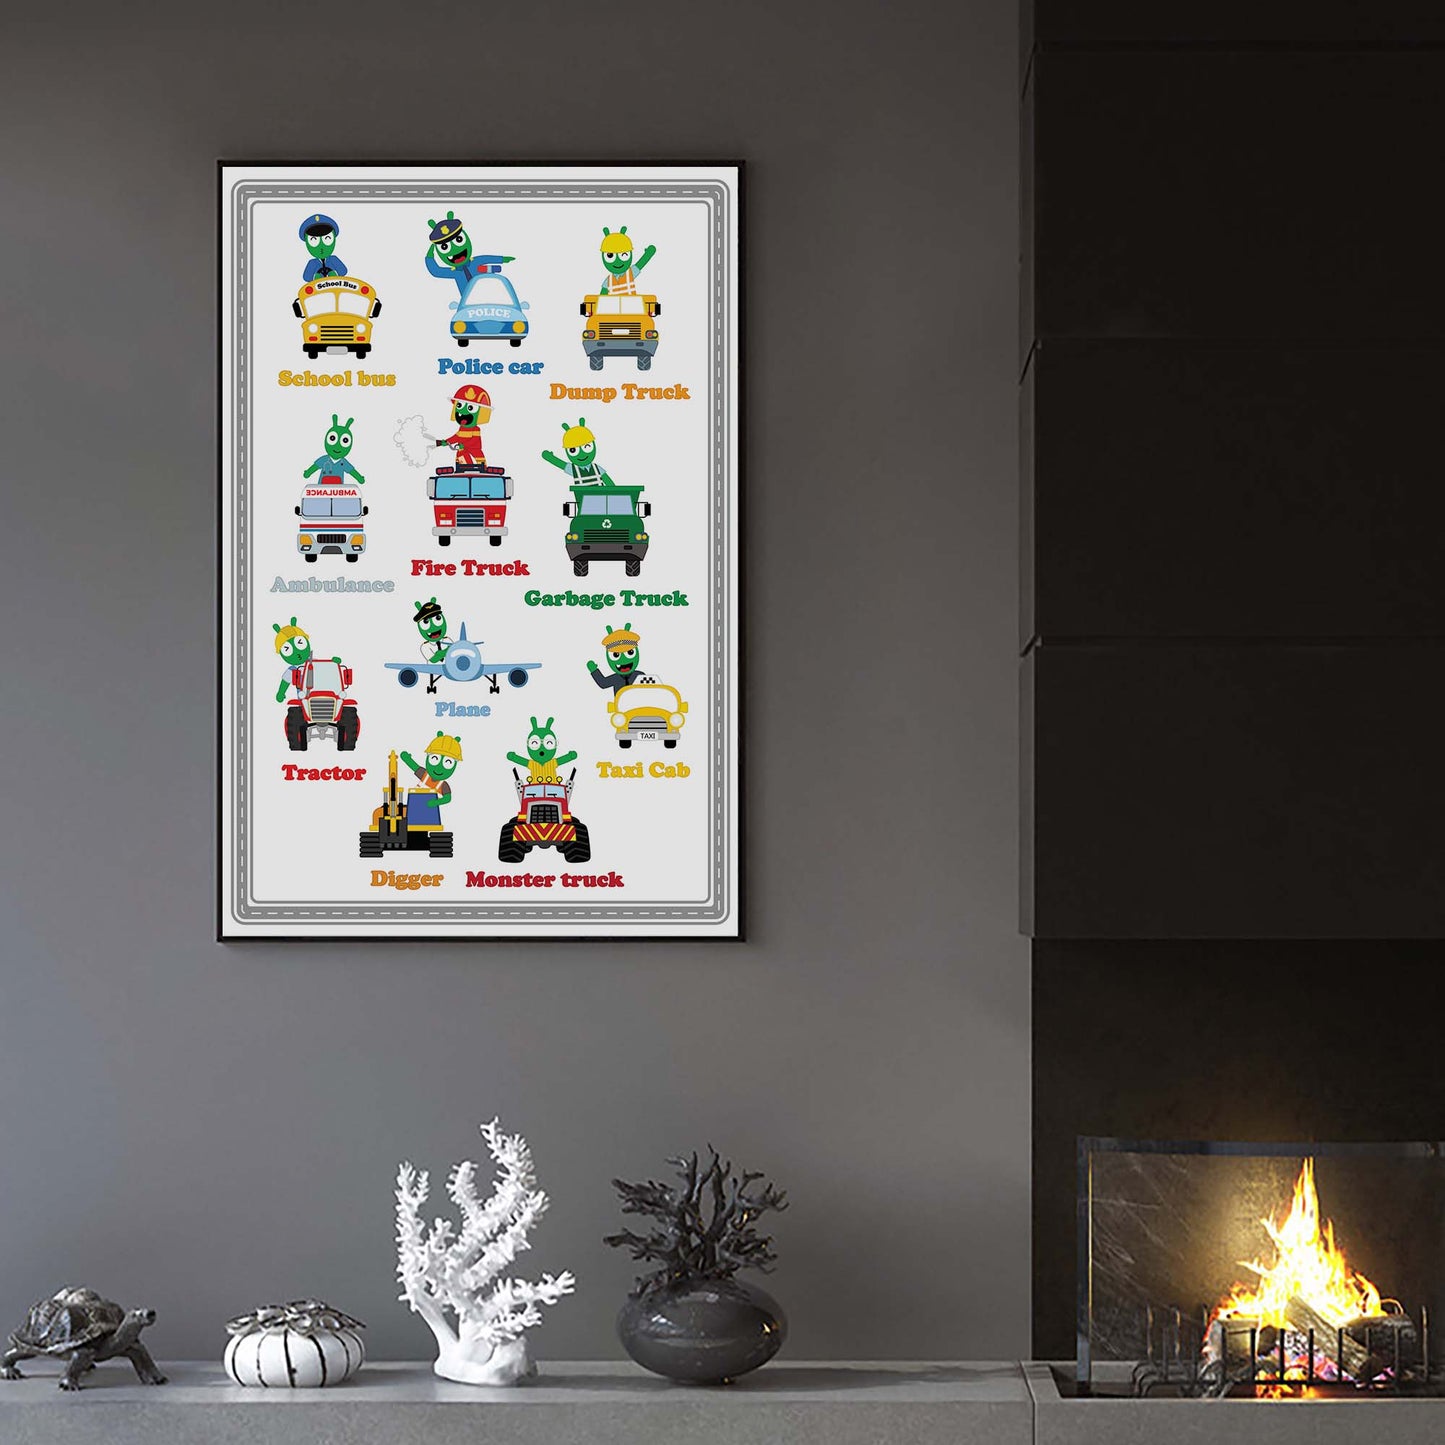 Pea Pea Vehicles Transportation Poster For Kids, Educational Posters Prints